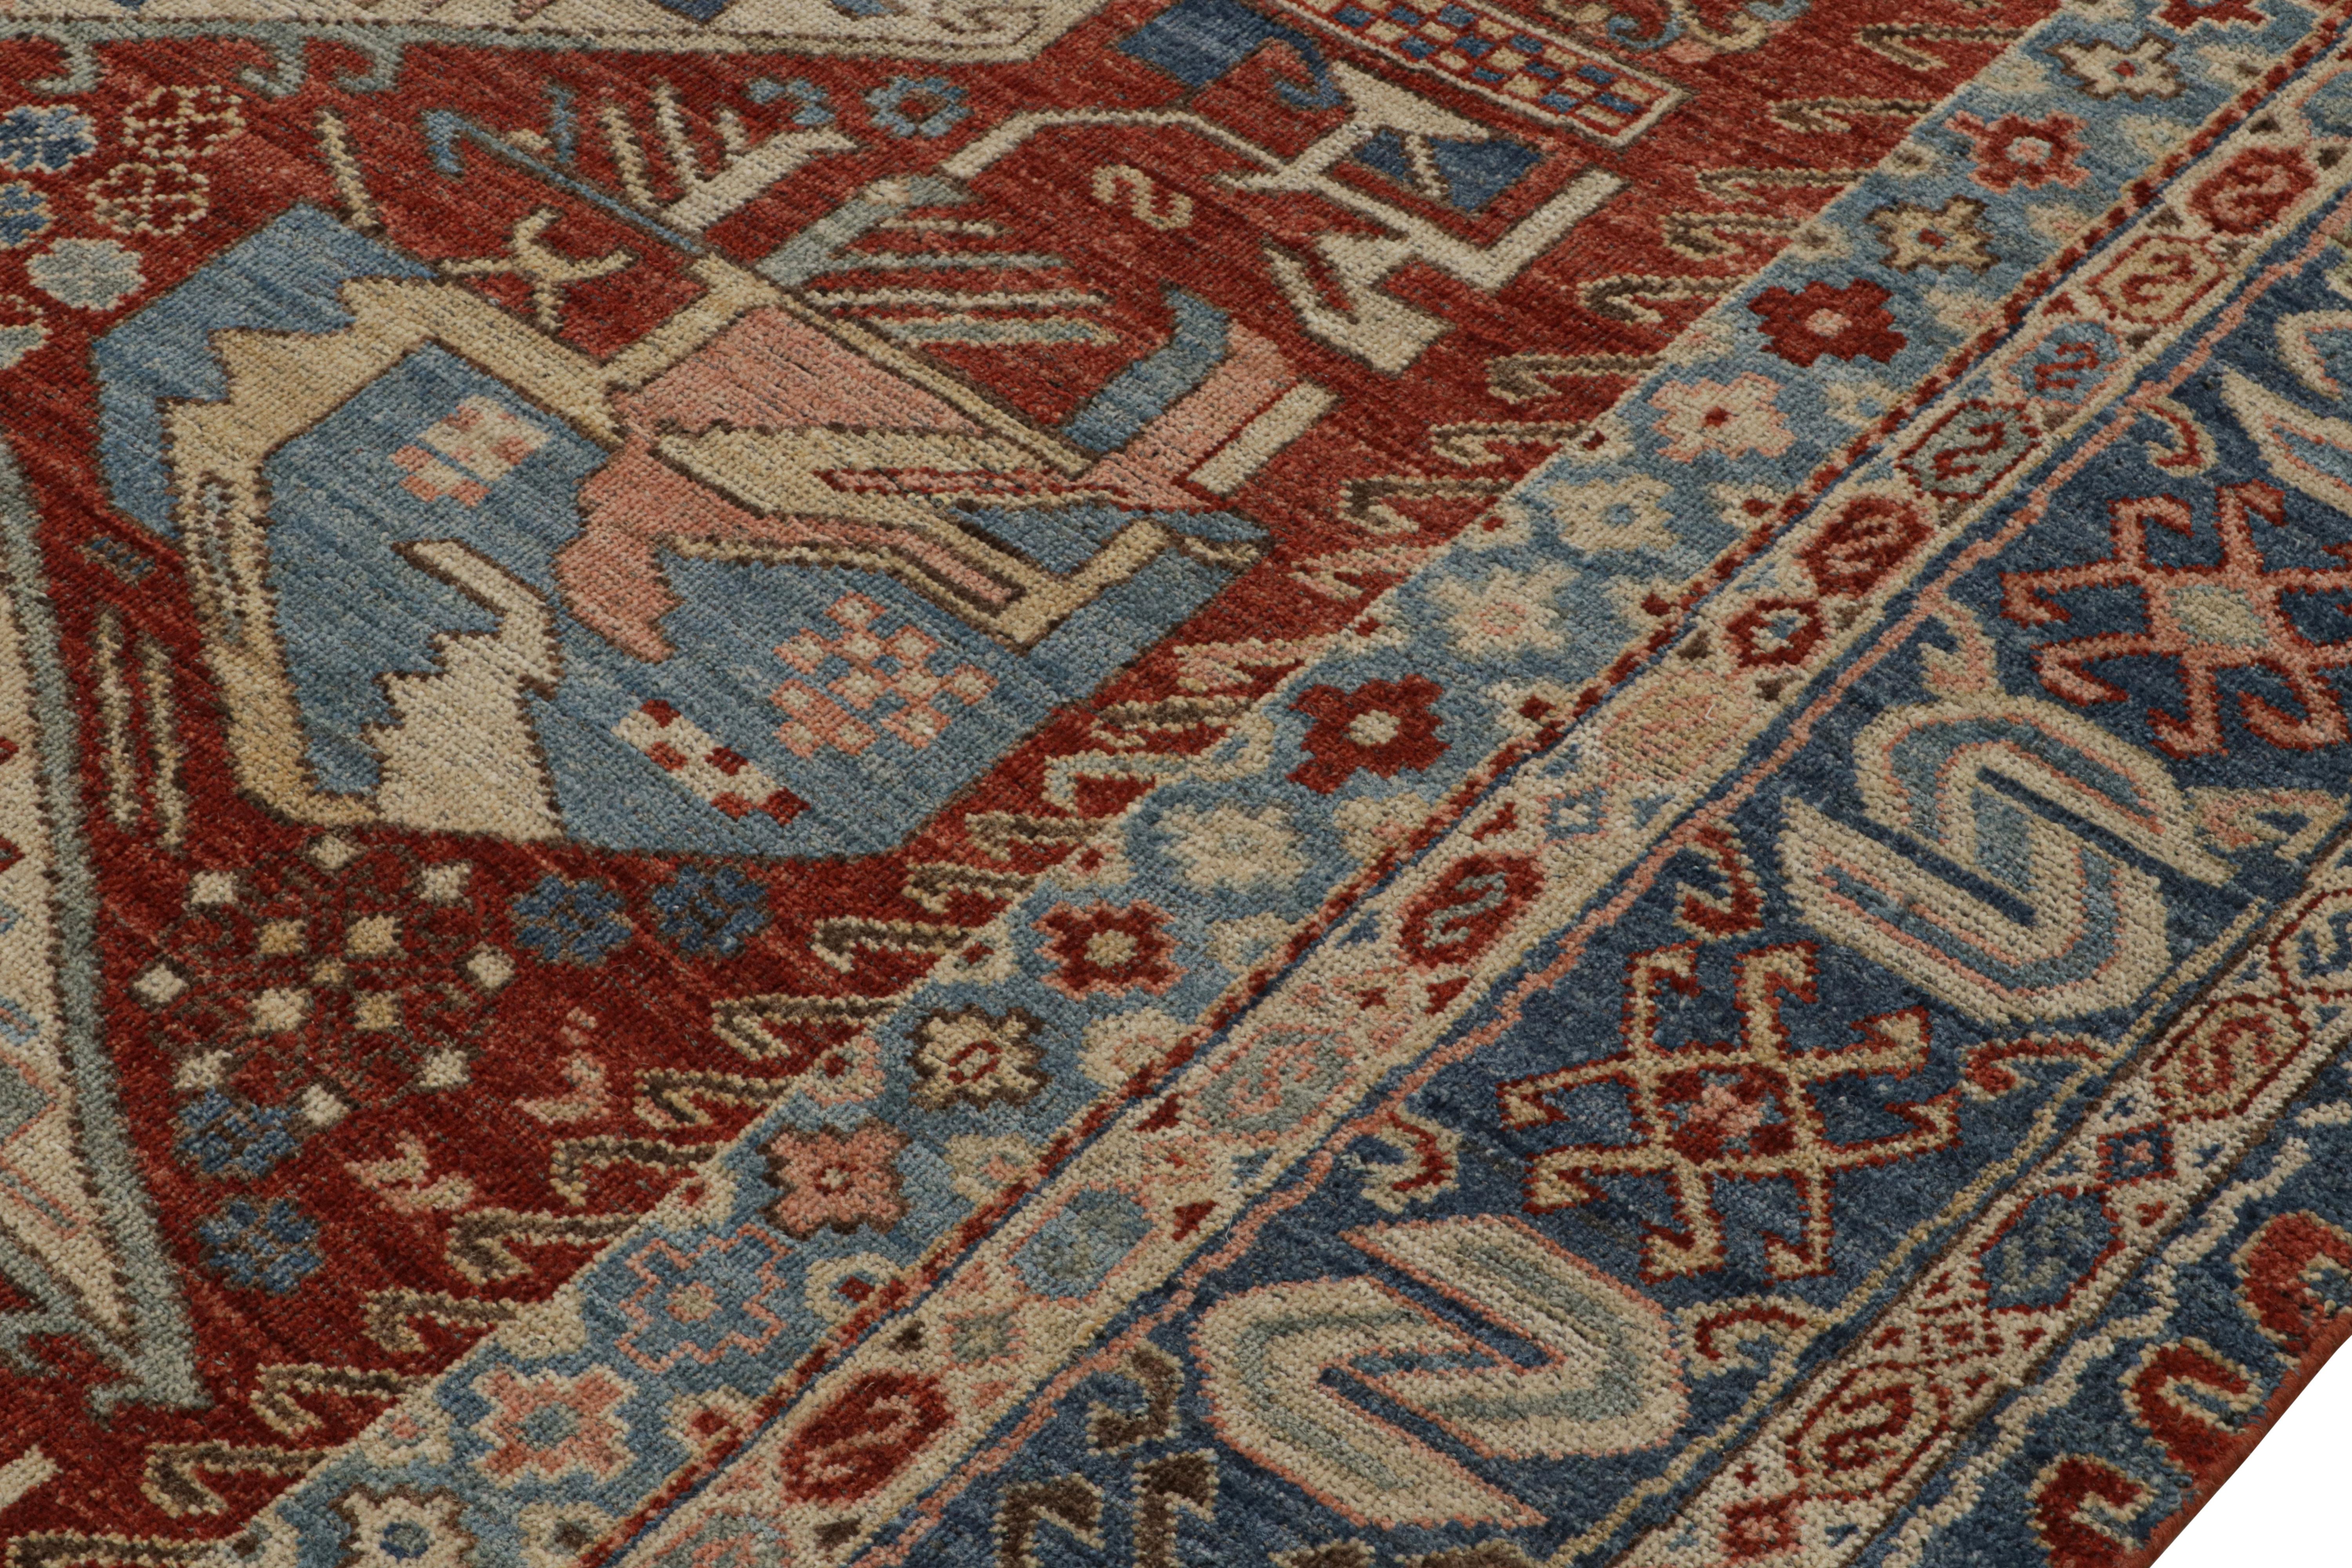 Indian Rug & Kilim’s Dragon Soumak Style Rug in Red and Blue Geometric Patterns For Sale